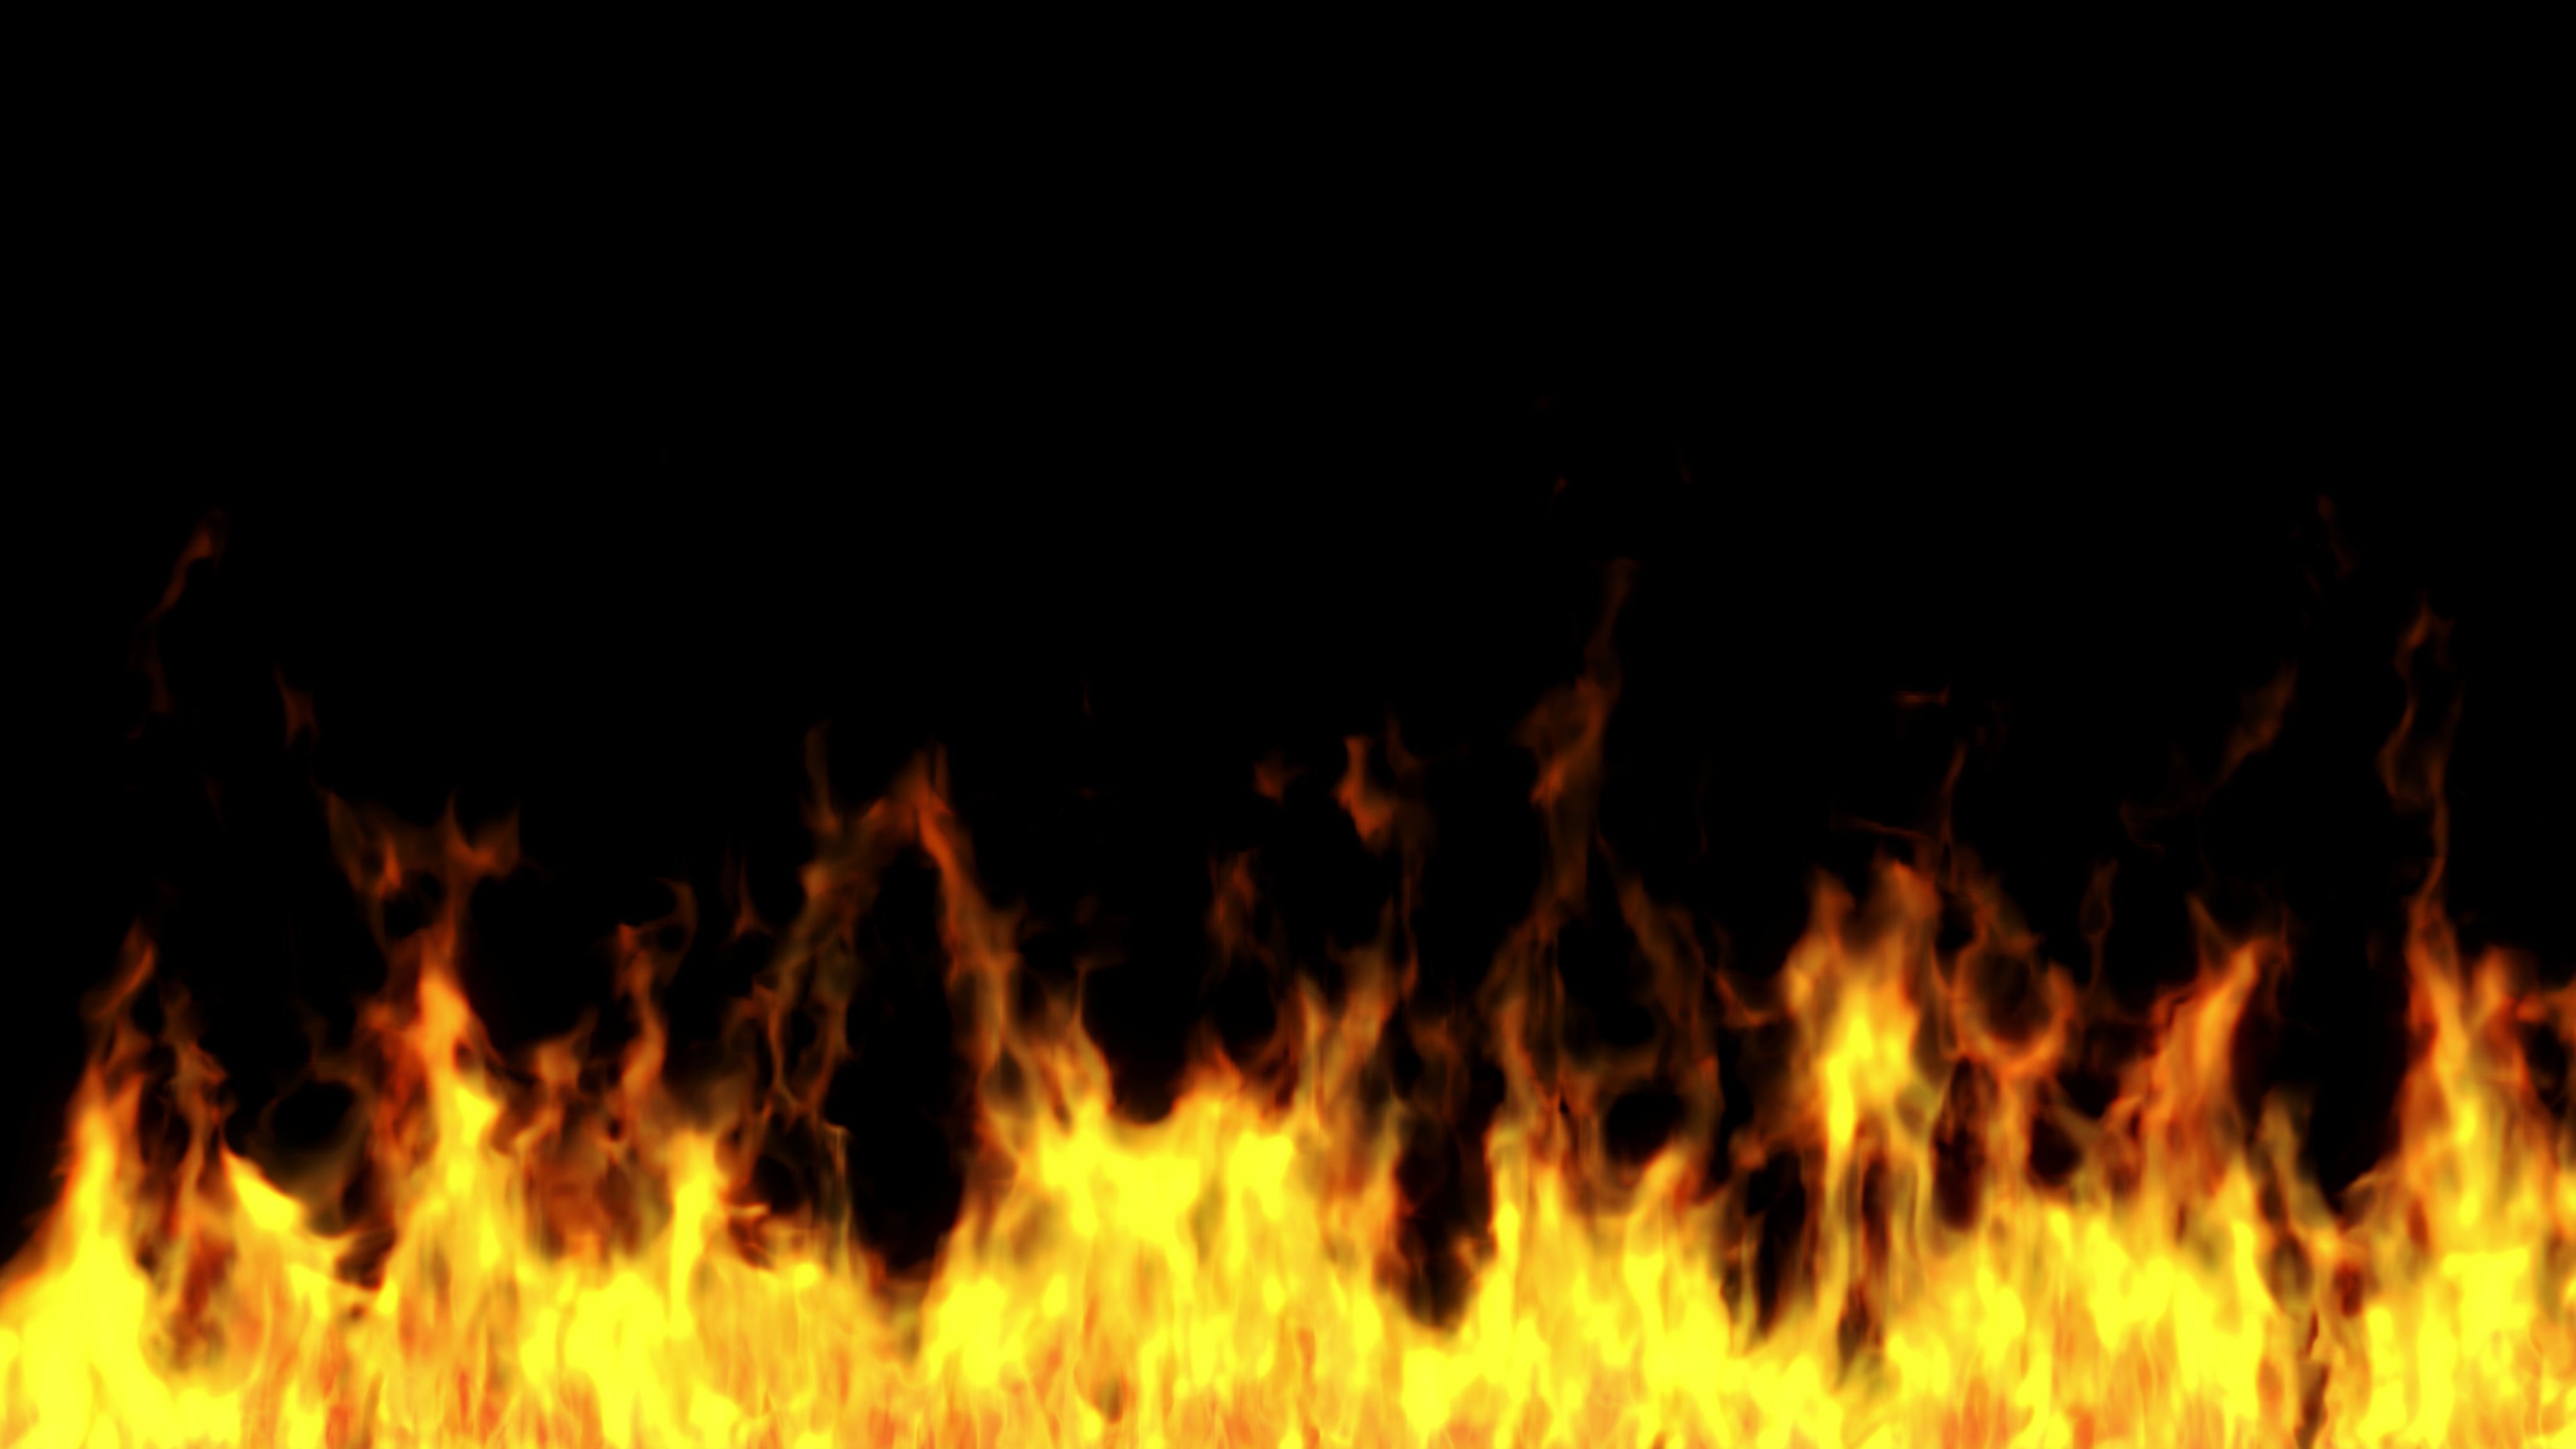 Fireplace Background Fresh Realistic Fire Animation Loop Stock Footage Animation Fire